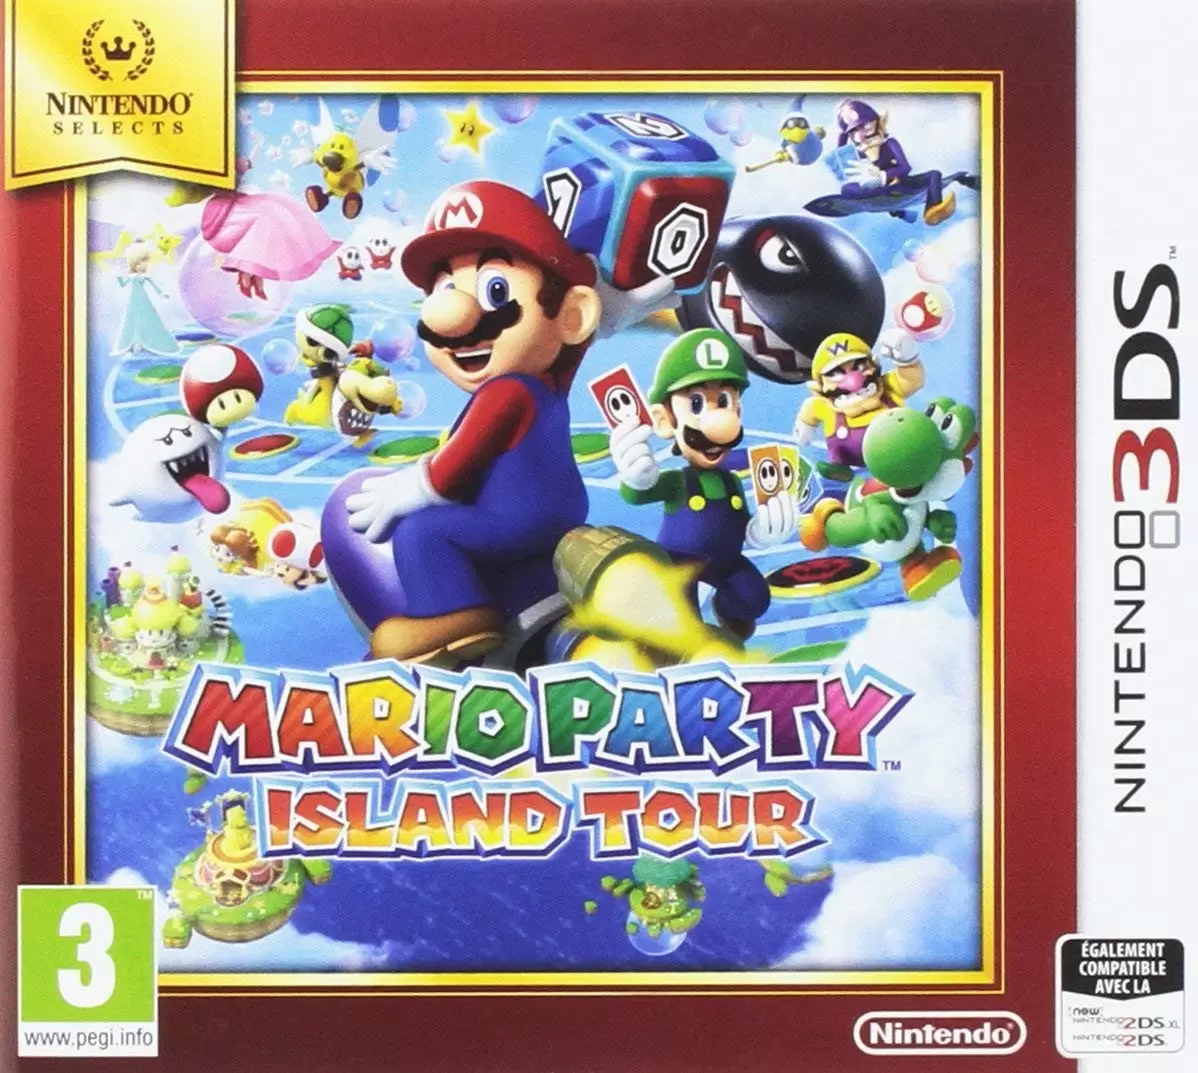 Nintendo 2DS / 3DS Games - Mario Party Island Tour (SELECTS)